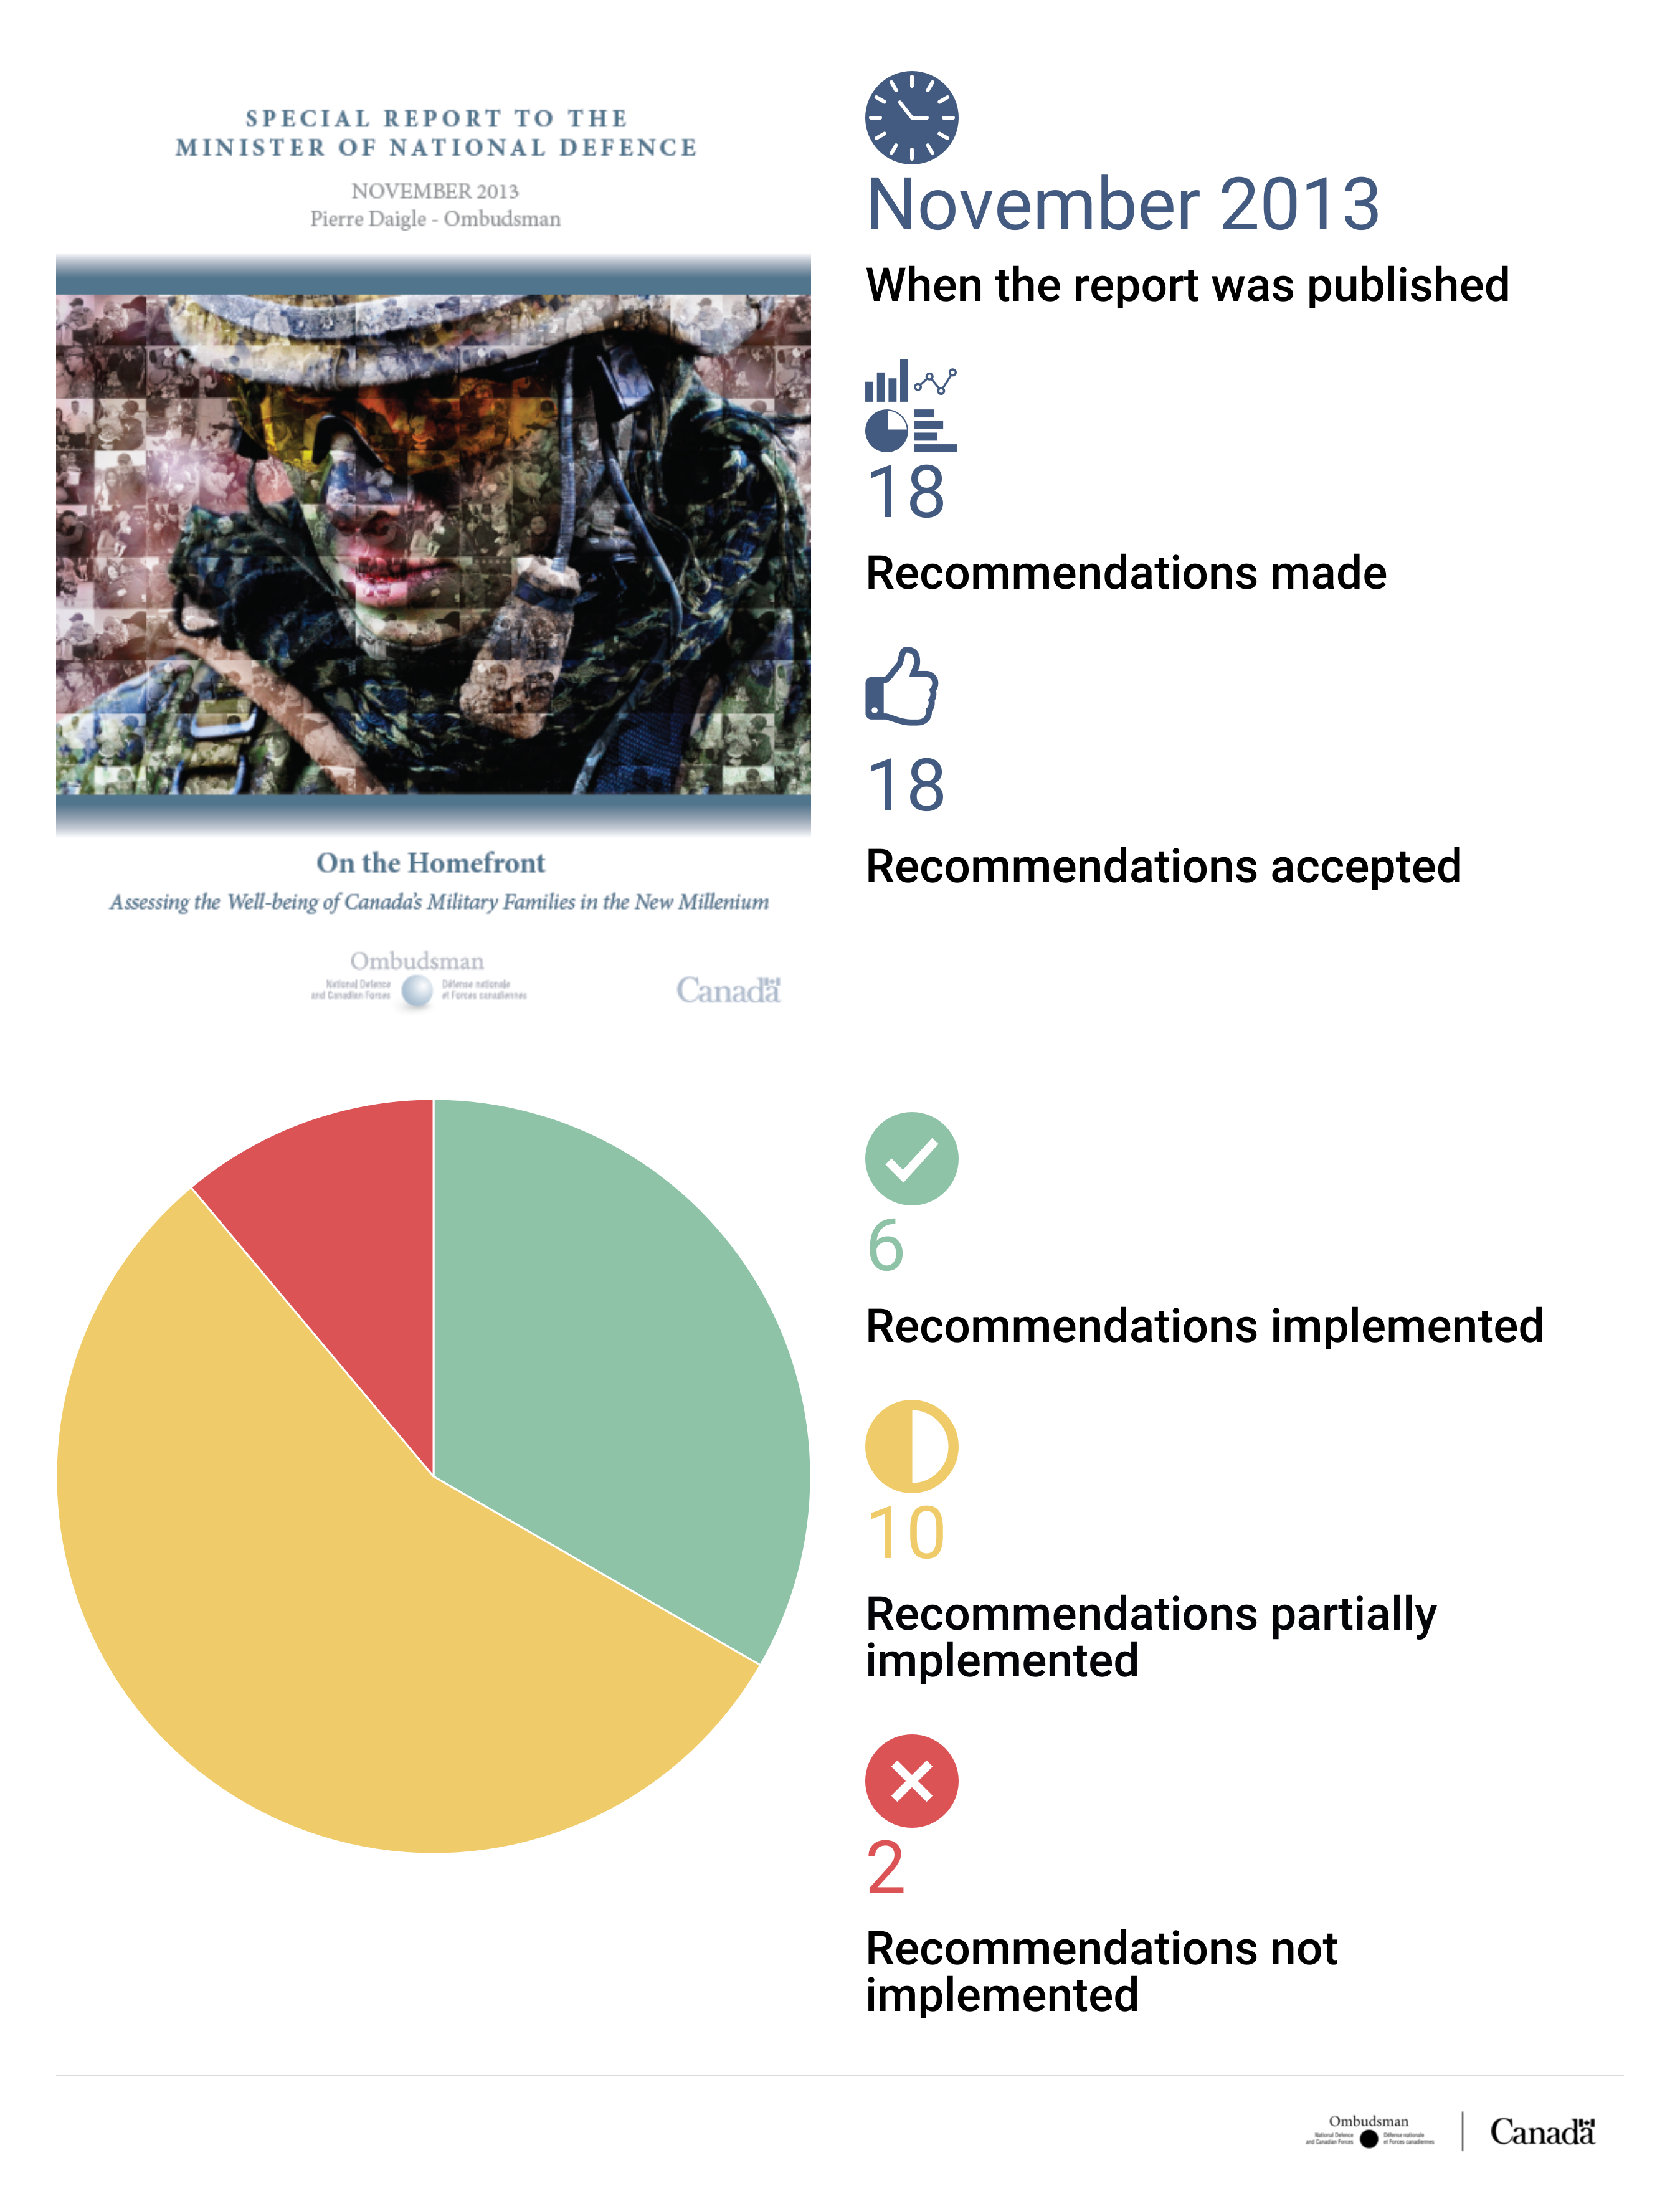 When the report was published: July 2013; Recommendations made: 11; Recommendations accepted: 11; Recommendations implemented: 5; Recommendations partially implemented: 3; Recommendations not implemented: 3 